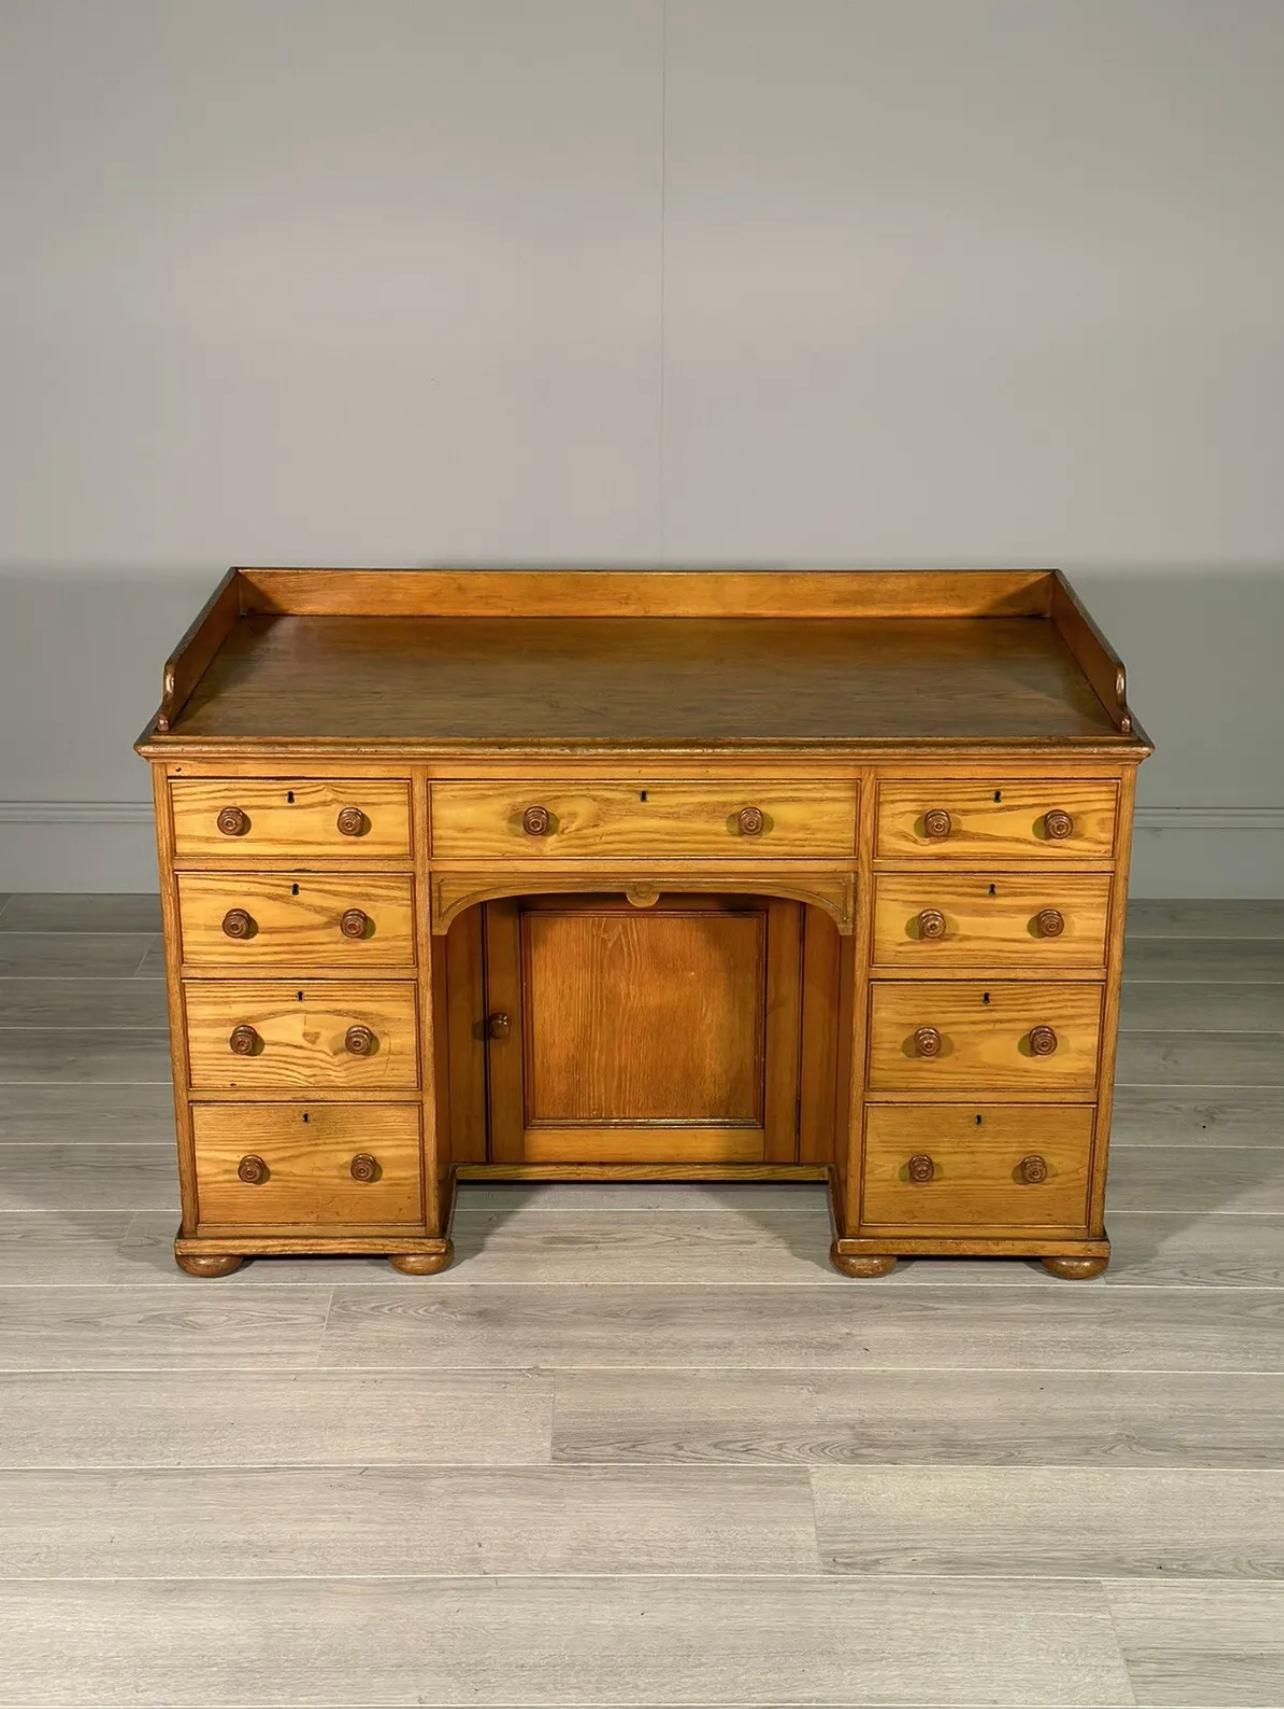 A fine quality kneehole desk dating to the late part of the 19th century. Made entirely out of solid ash with a lovely rich warm colour, the desk is in fantastic original condition even down to the oak lining paper to the drawer internals. A fine